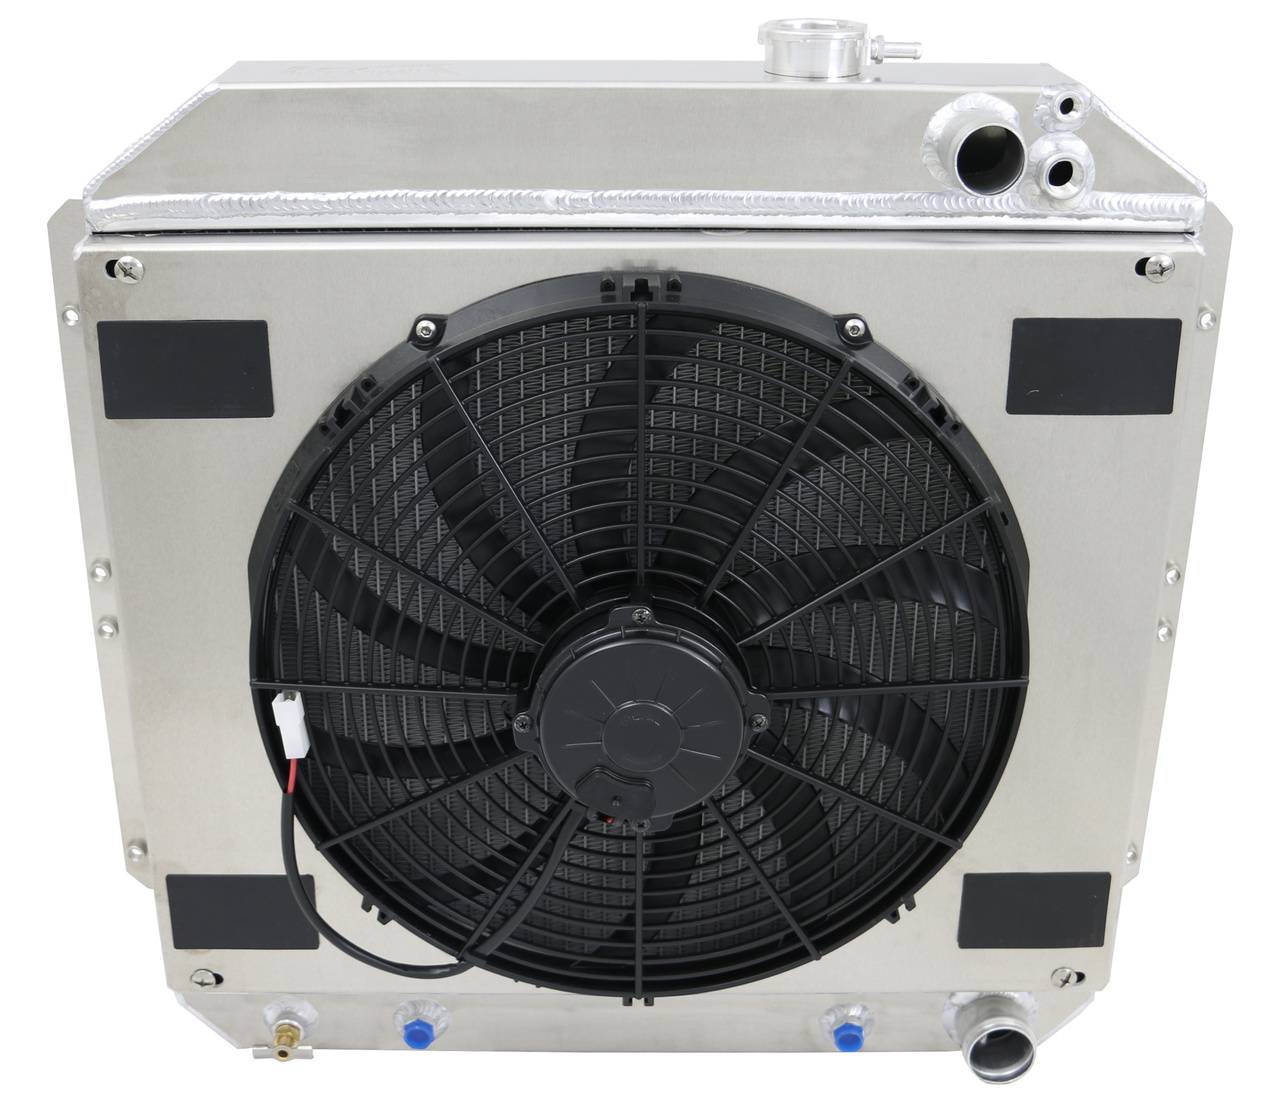 Wizard Cooling Inc - Wizard Cooling - 1949-1954 Chevrolet Bel Air/ Impala Aluminum Radiator With Fan - 10024-218LSMD